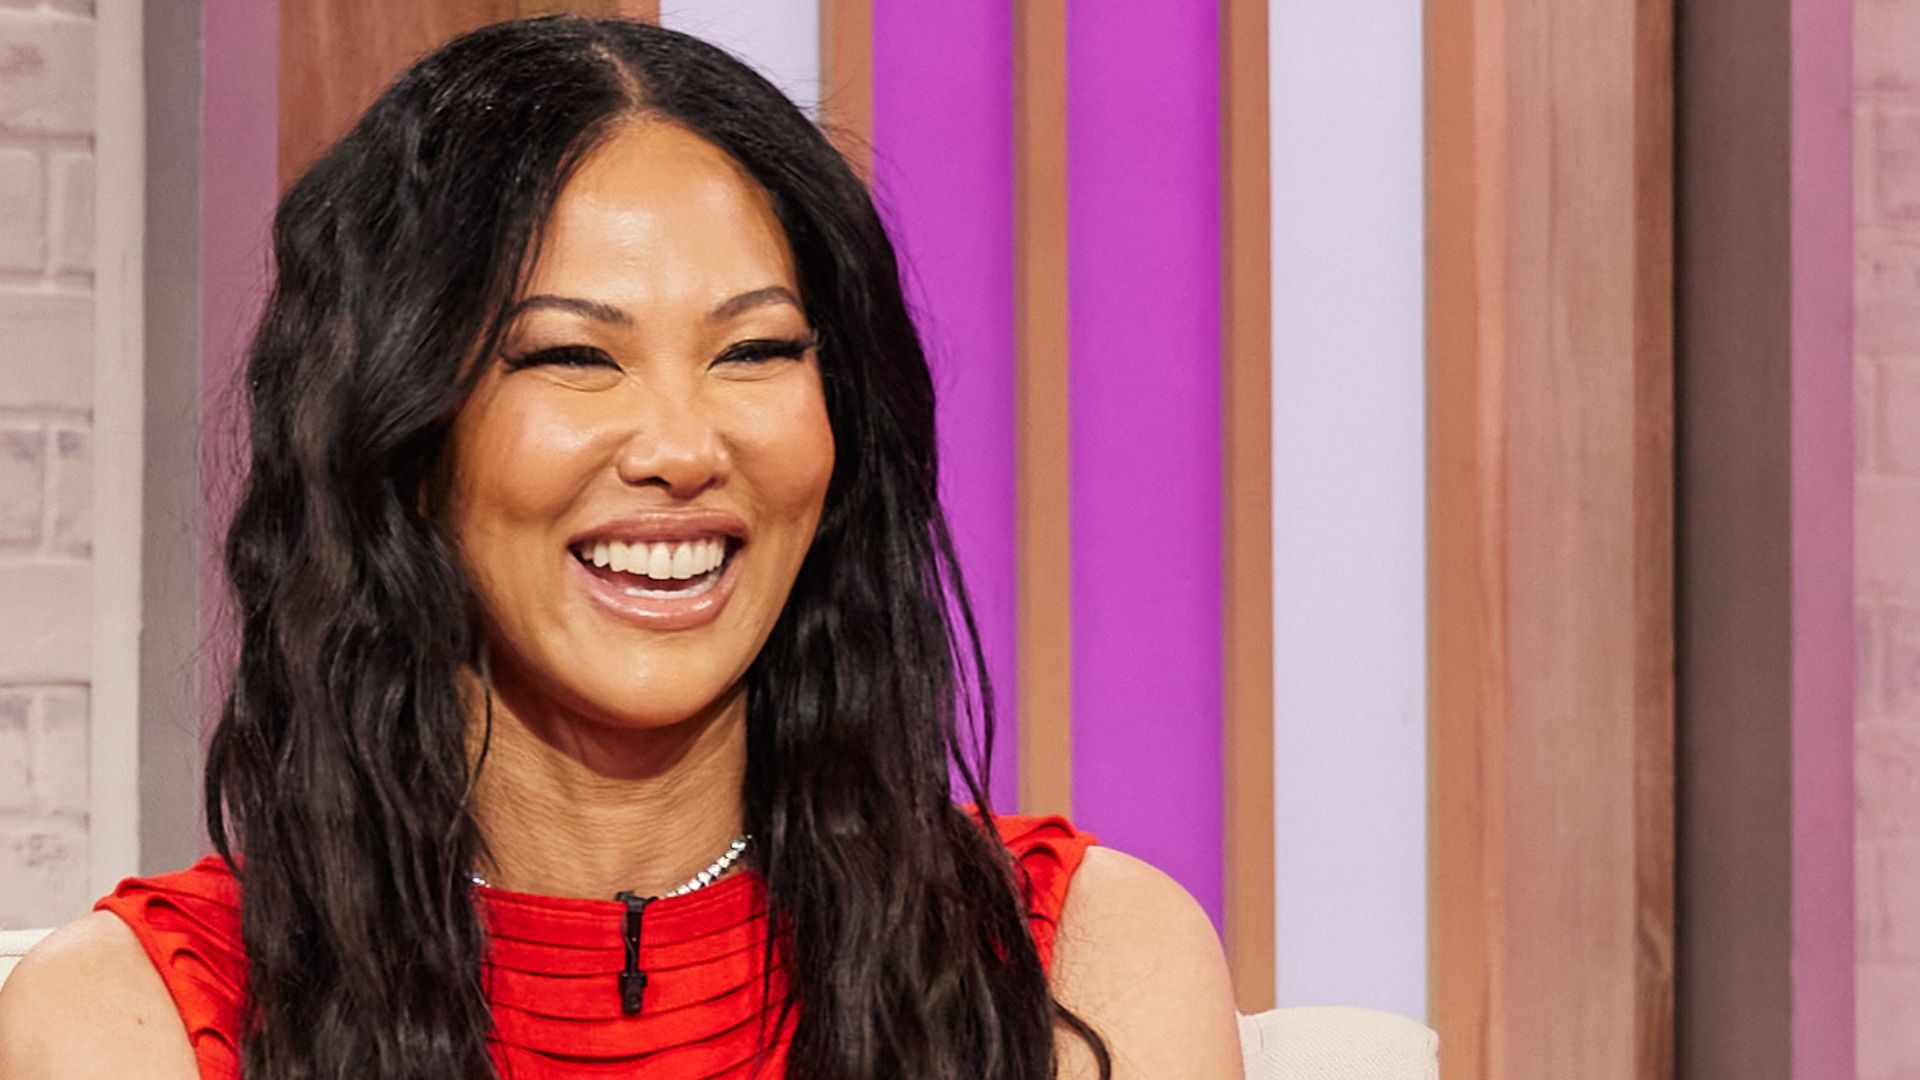 Kimora Lee Simmons Talks About Her Children In The Public Eye